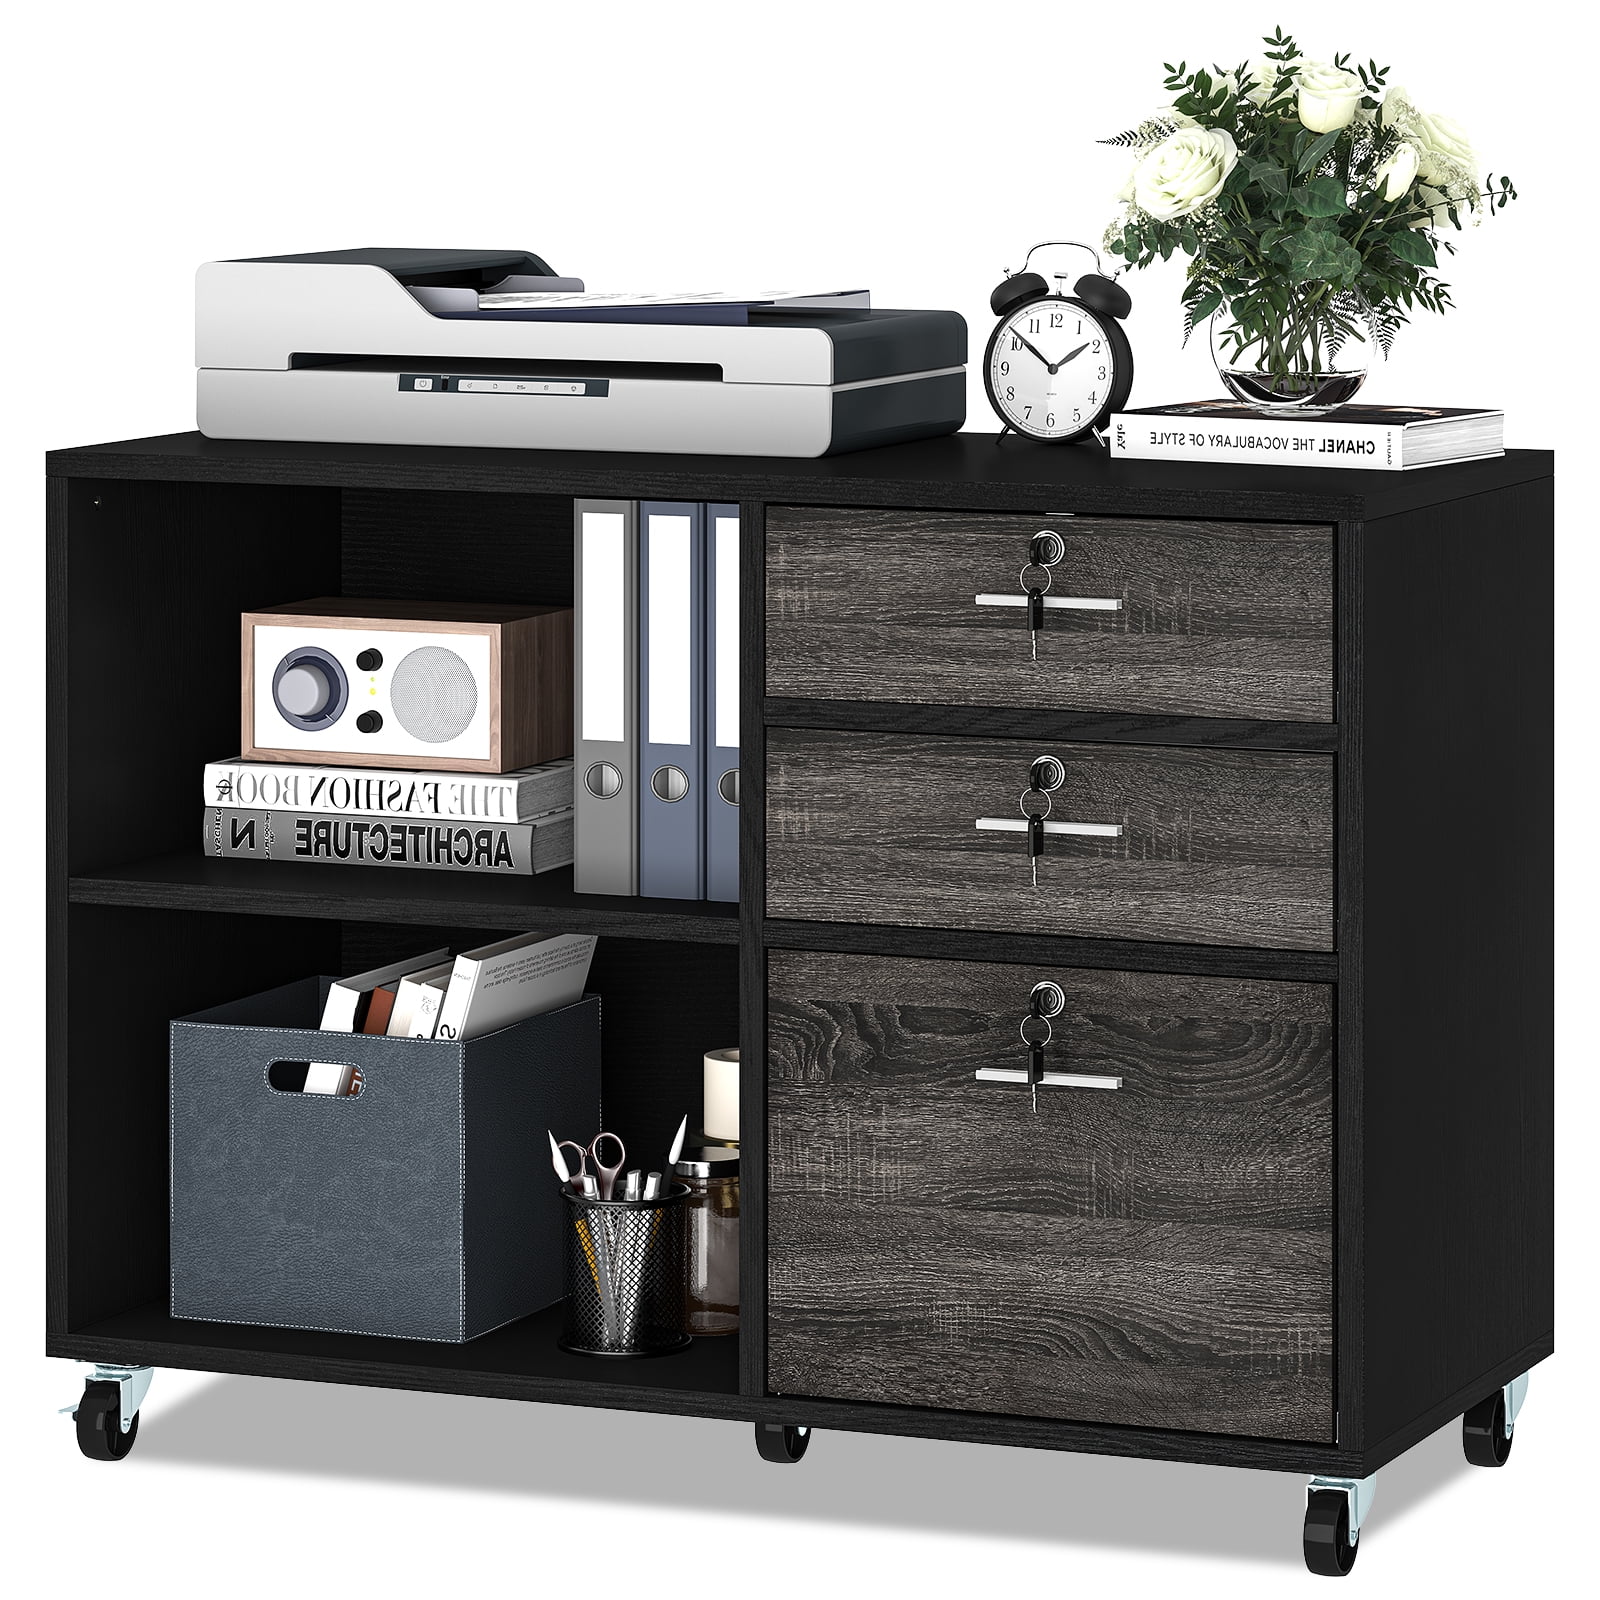 Large Mobile Filing Cabinet Printer Stand with Storage Shelves Functional Wood Cabinet for Home Office with Wheels Black BHUS-SZKST-OC-B sogesfurniture 3 Drawer Mobile File Cabinet 